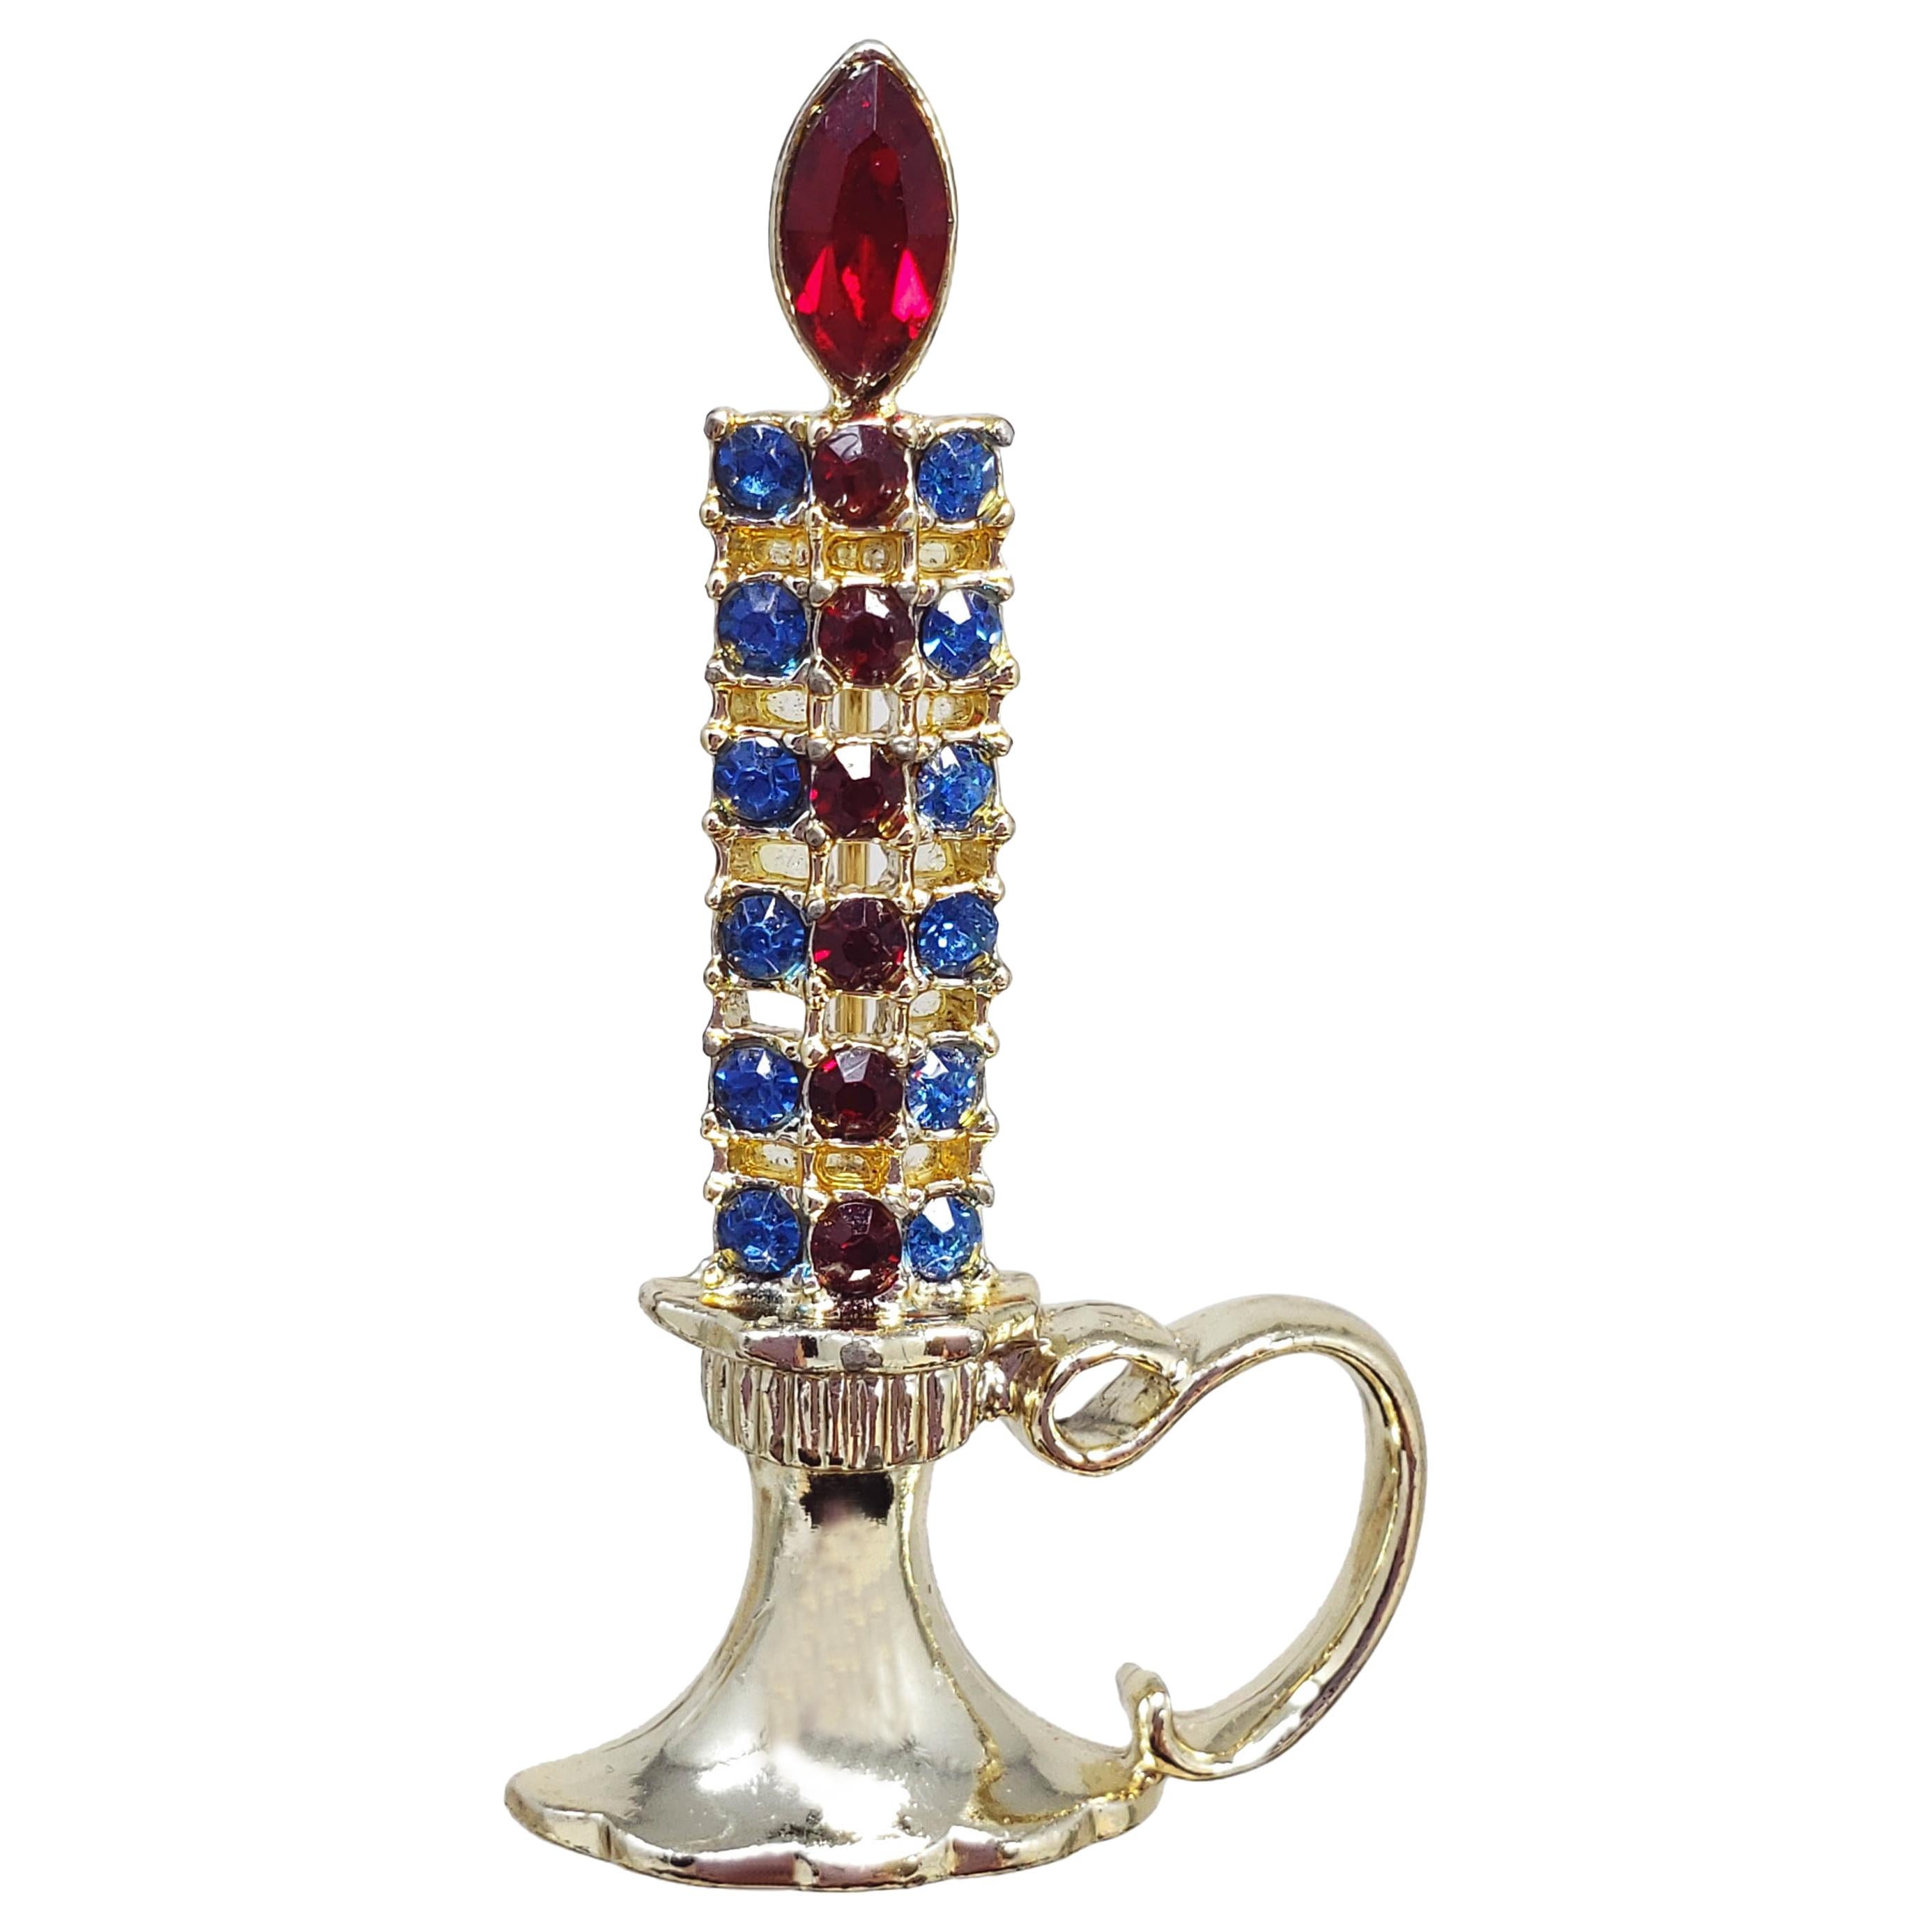 Emmons Glowing Candlestick Crystal Brooch Pin in Gold, Mid 1900